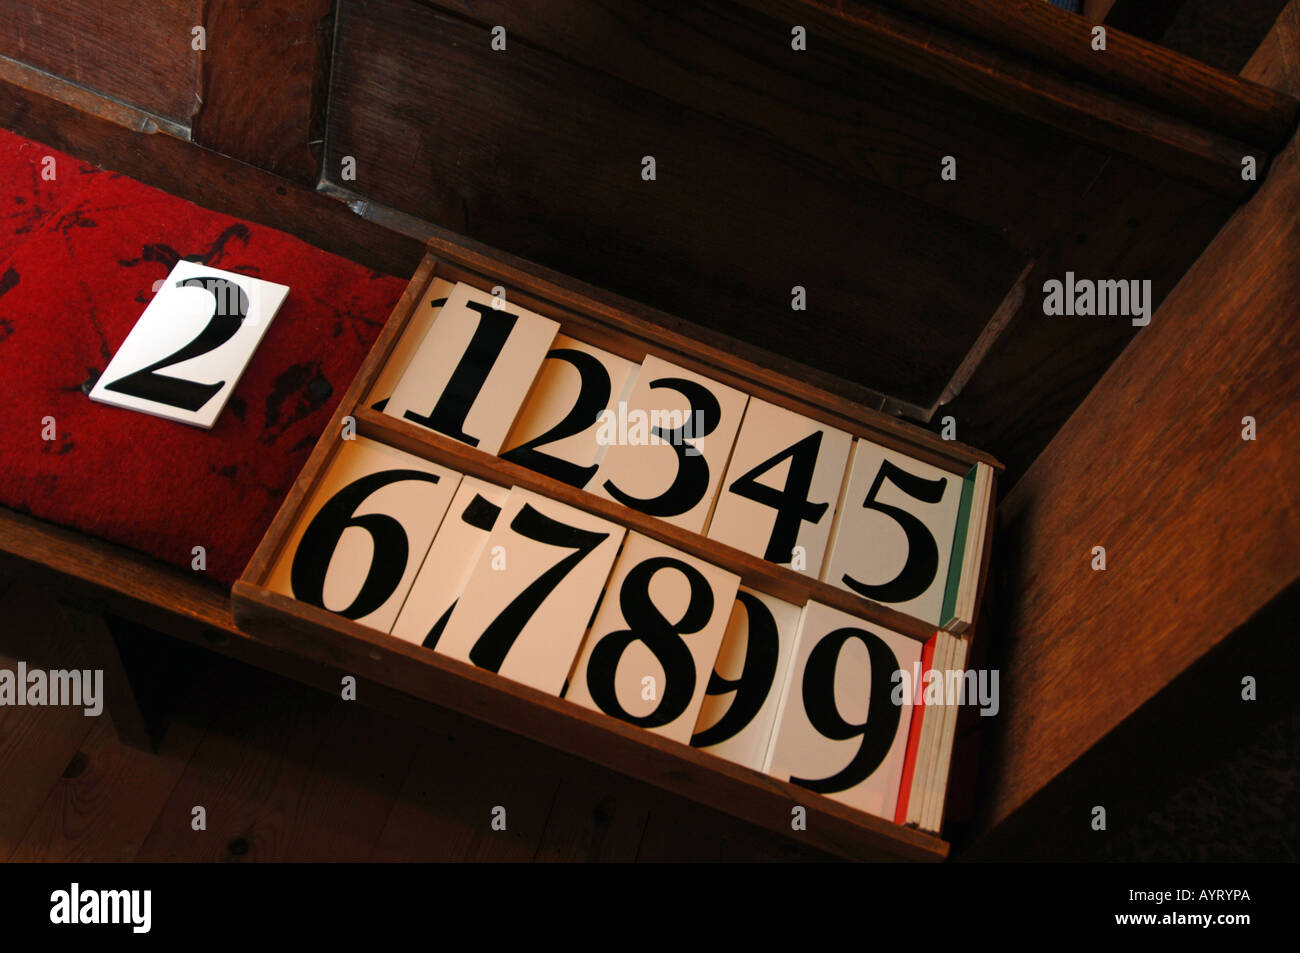 Hymn board numbers on a church bench Stock Photo